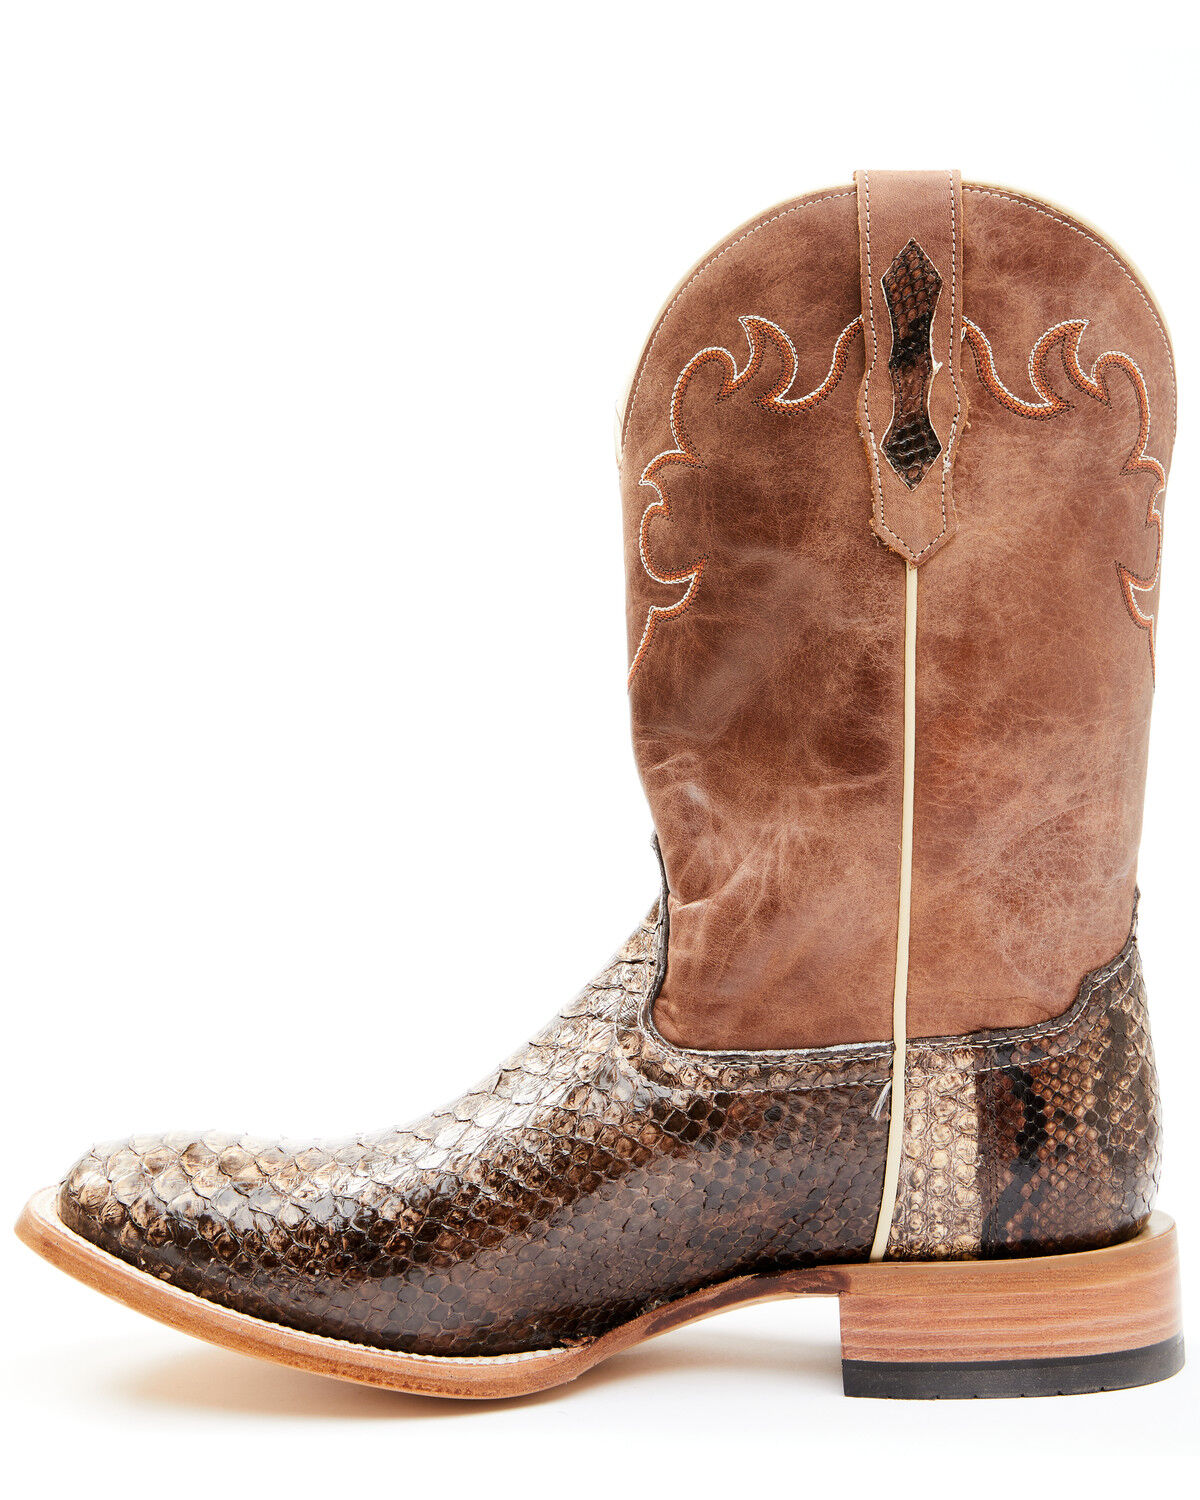 snakeskin square toe cowboy boots